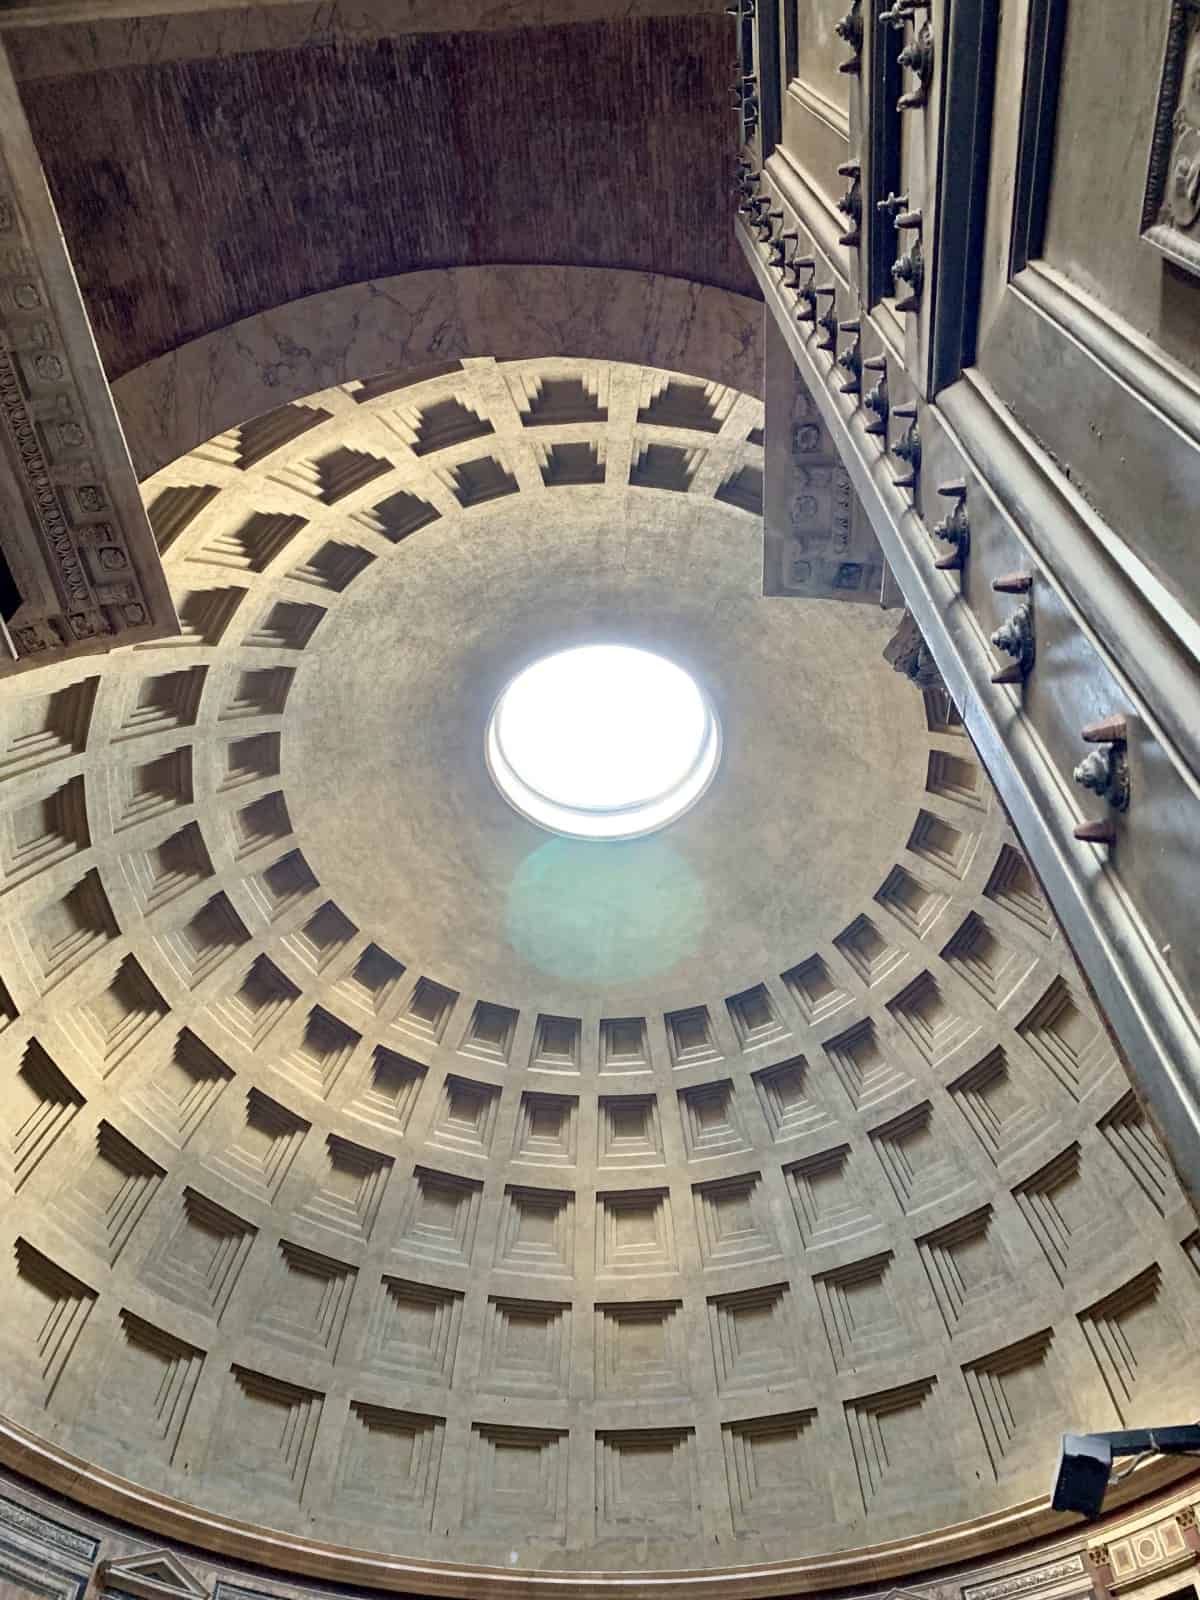 Rome travel guide - the inside of the Pantheon is so cool